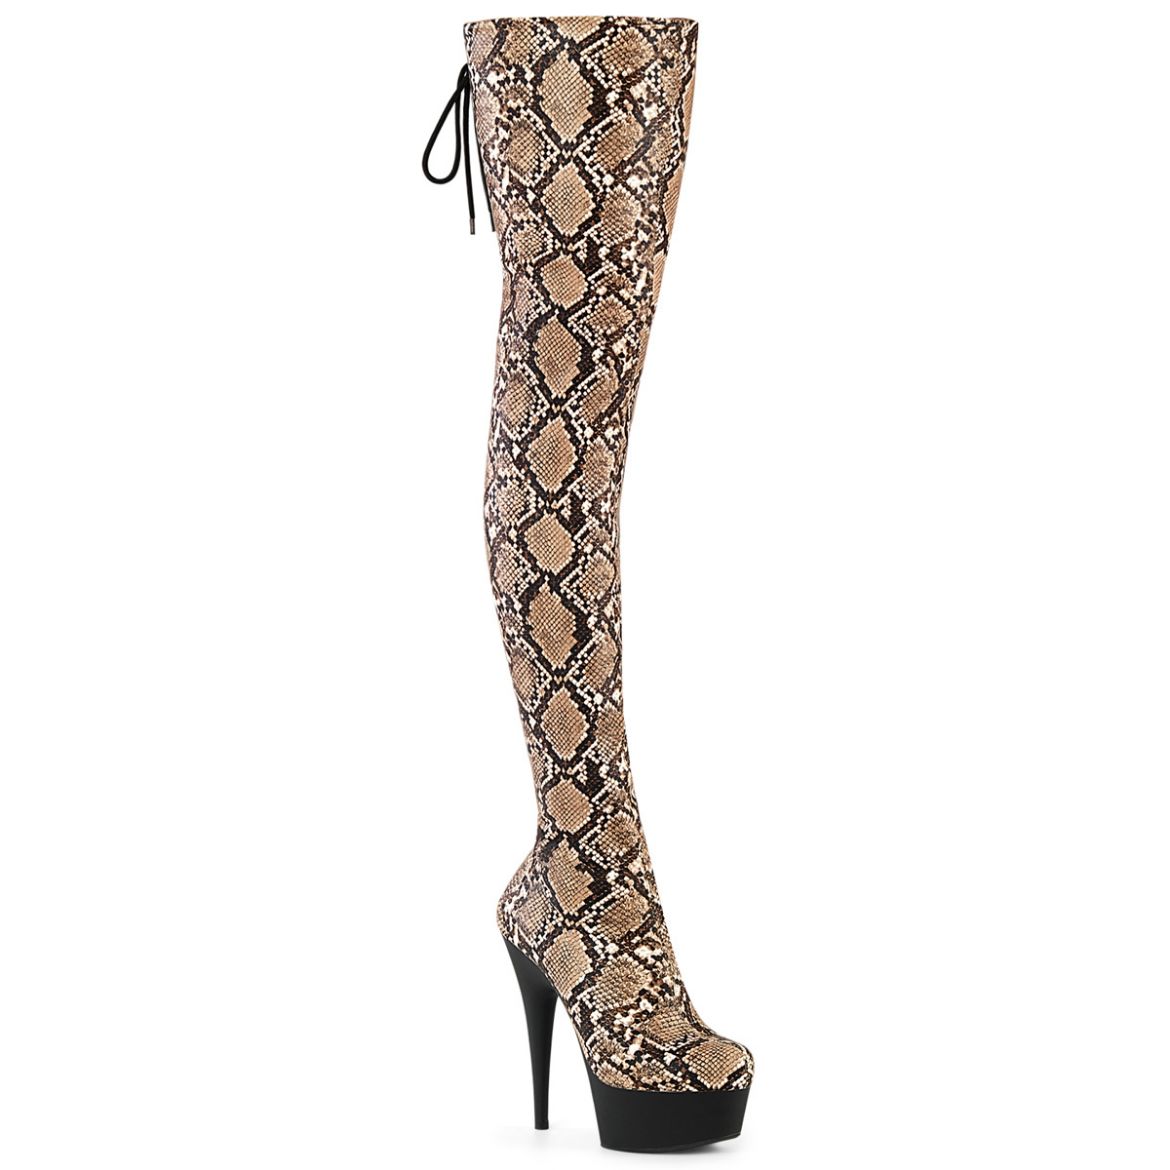 Product image of Pleaser DELIGHT-3008SP-BT Tan-Brown Snake Print/Blk Matte 6 Inch Heel 1 3/4 Inch PF Stretch Snake Print Pull-On Thigh Boot